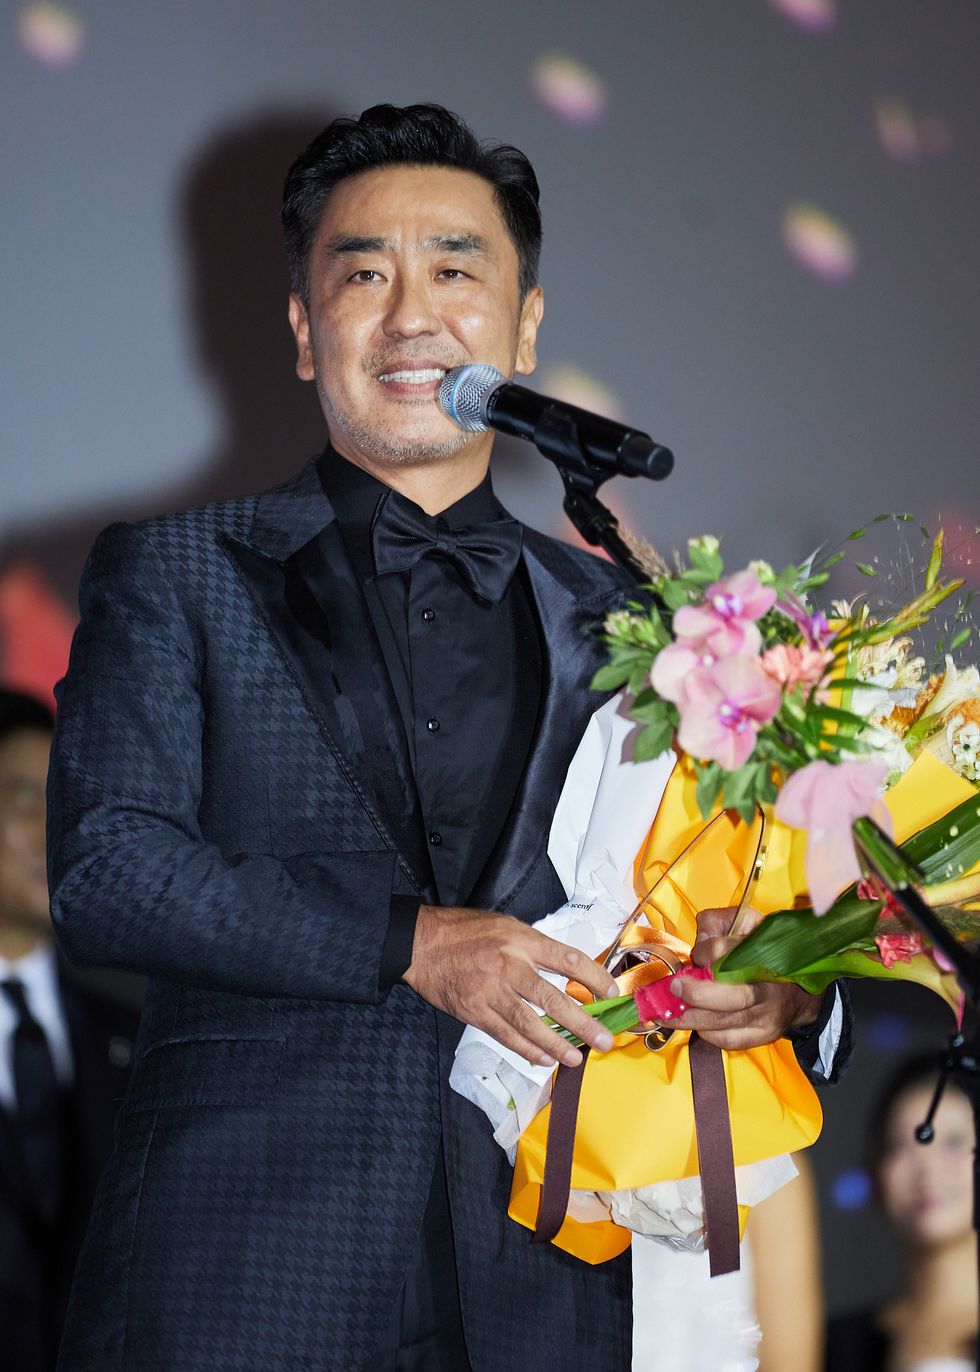 a man holding flowers and smiling